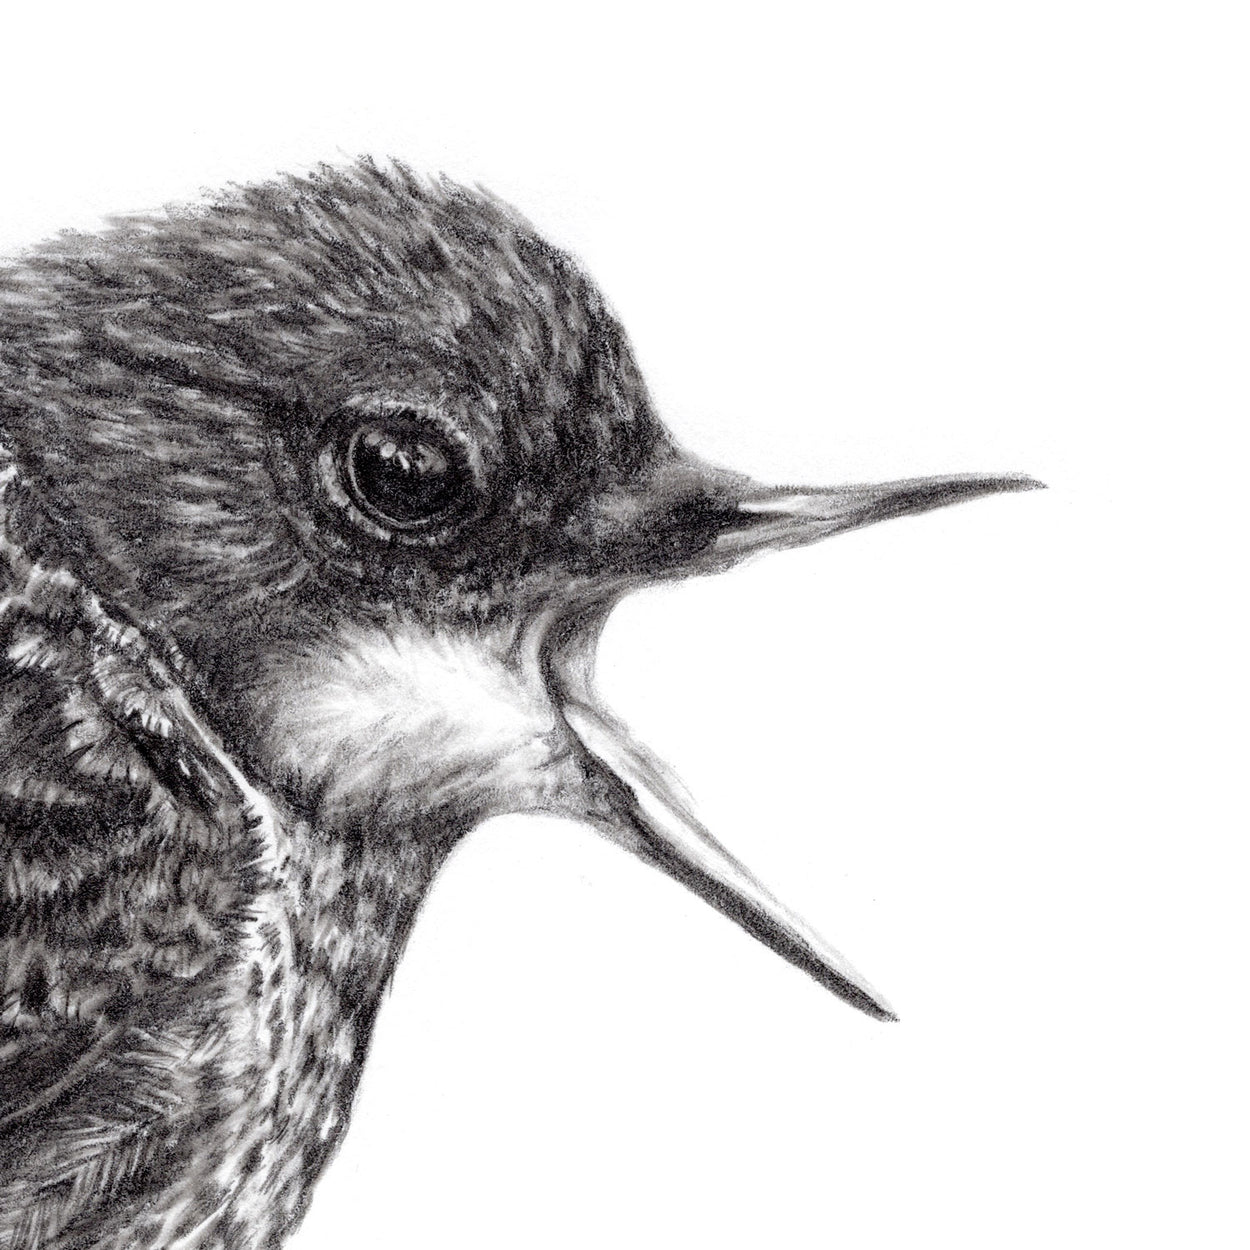 Dipper Bird Drawing Close-up - The Thriving Wild